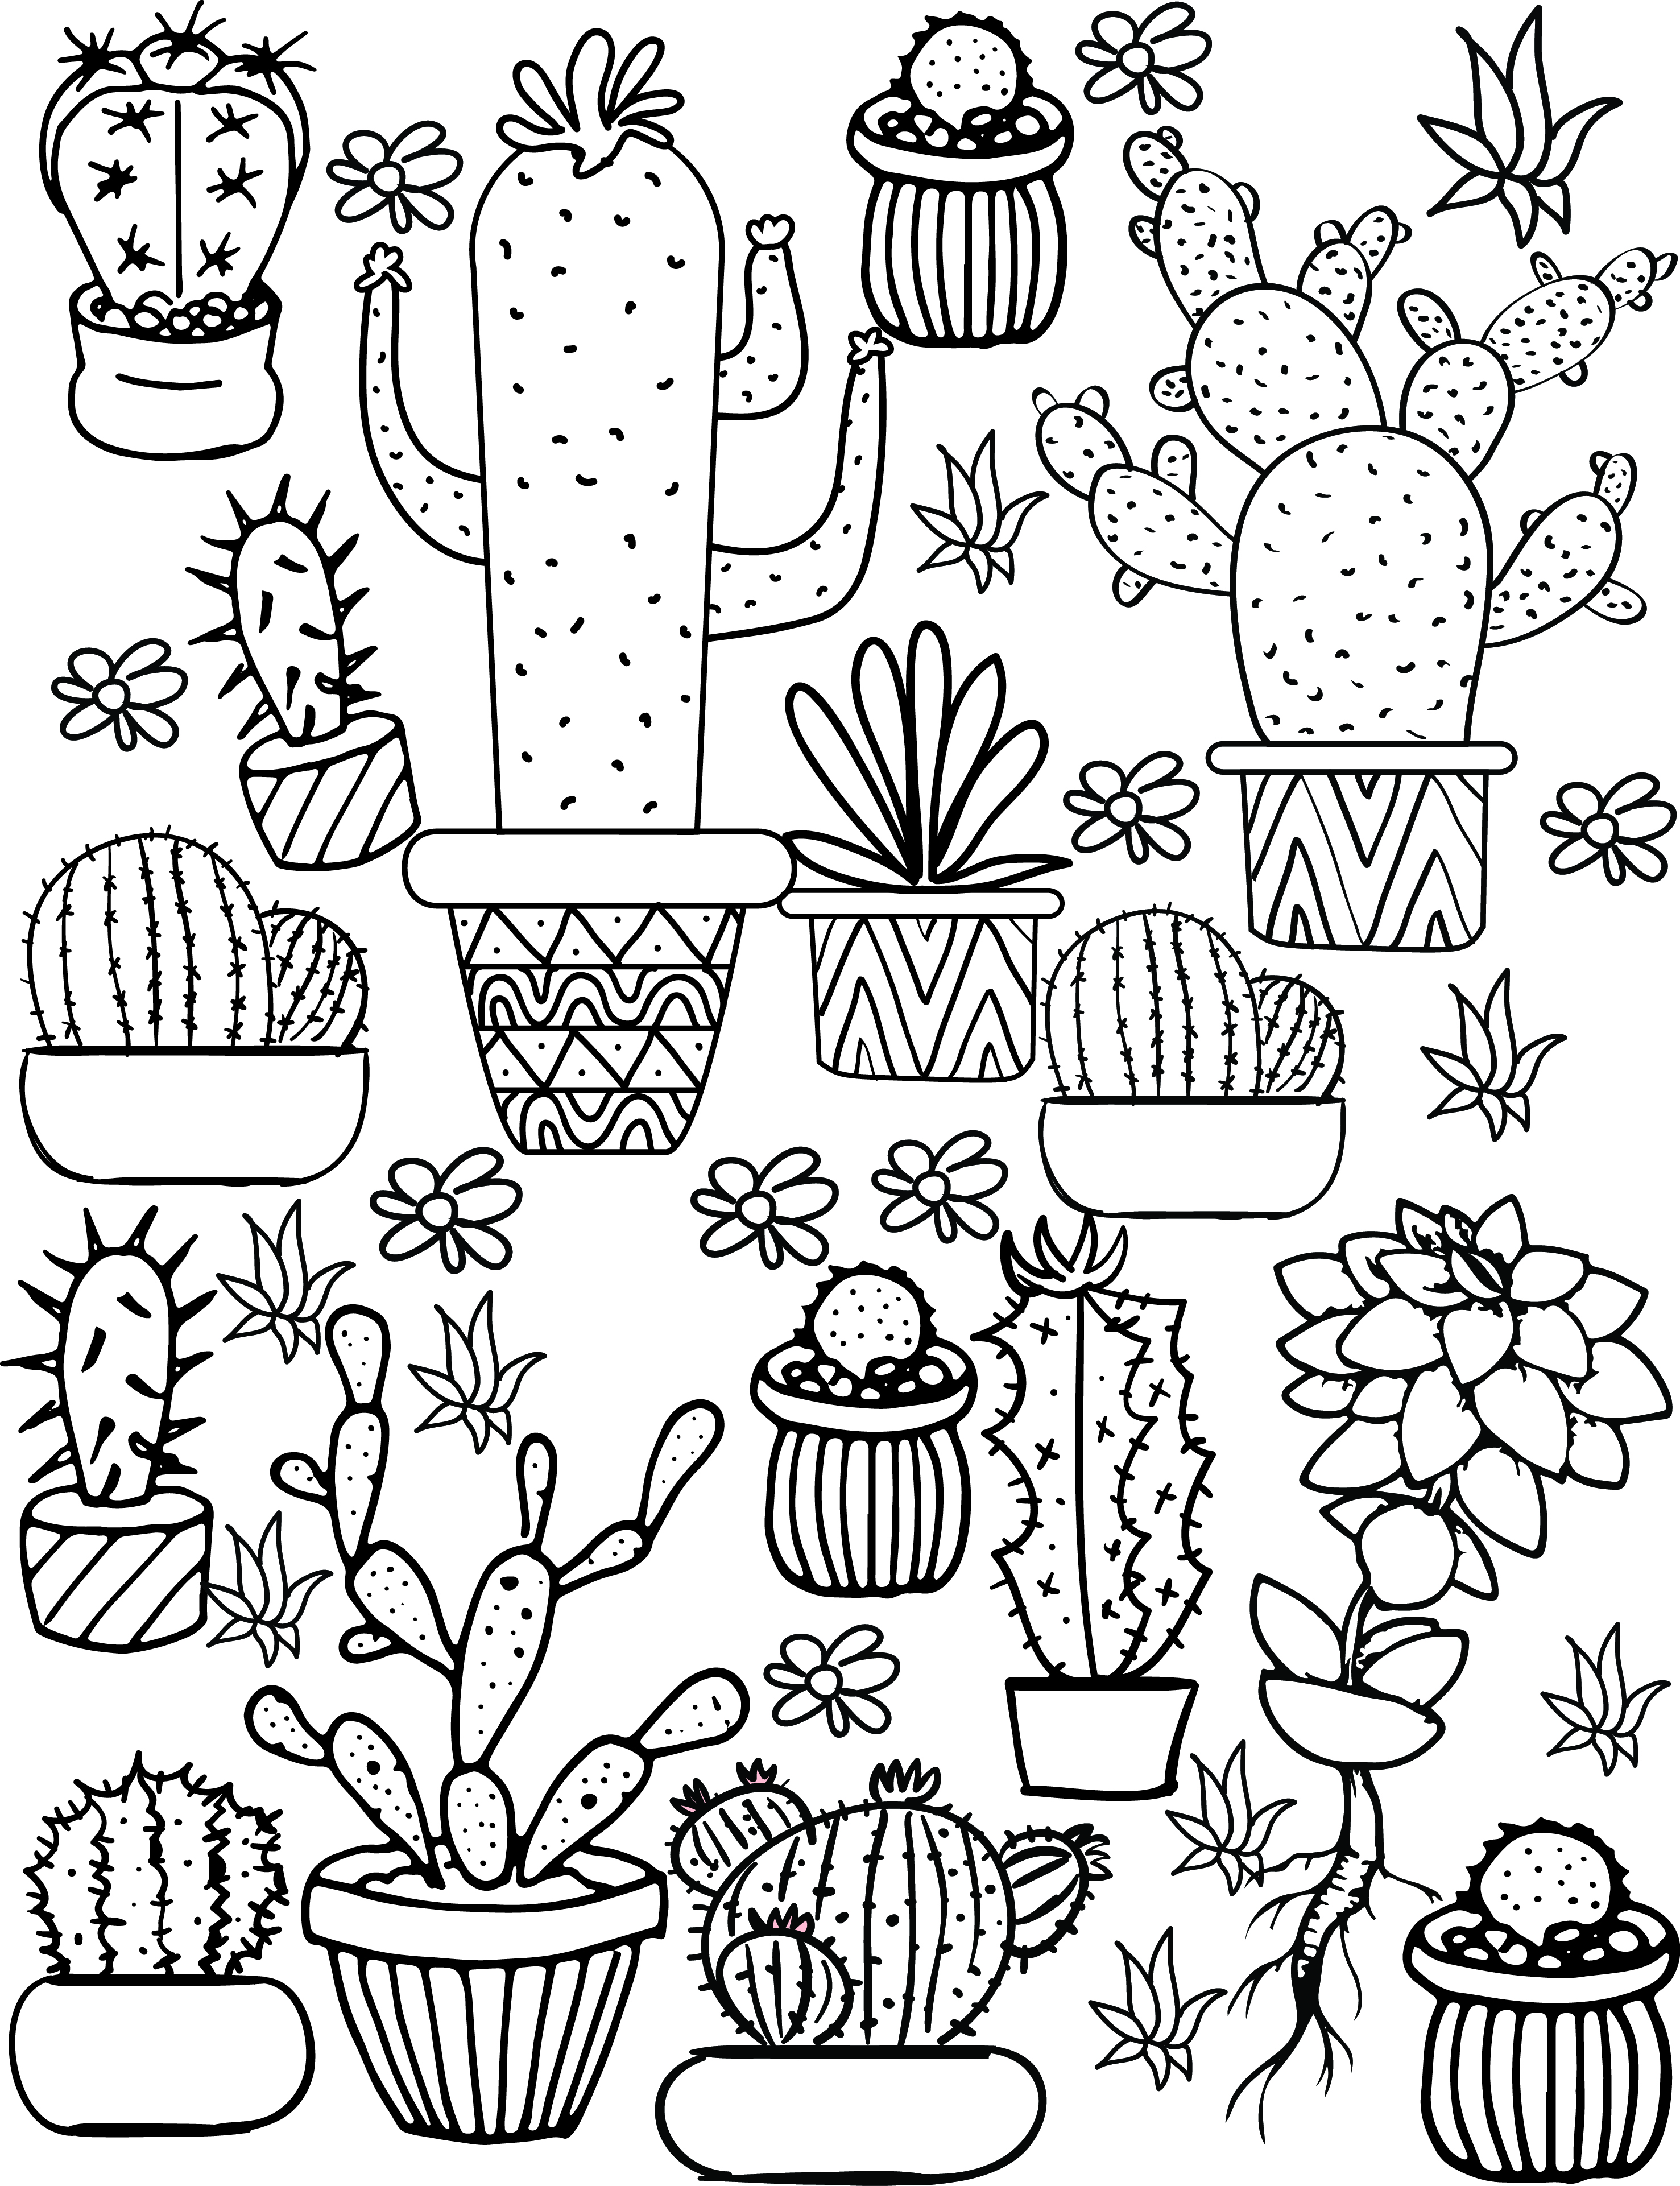 Aesthetic Coloring Pages Printable - Customize and Print